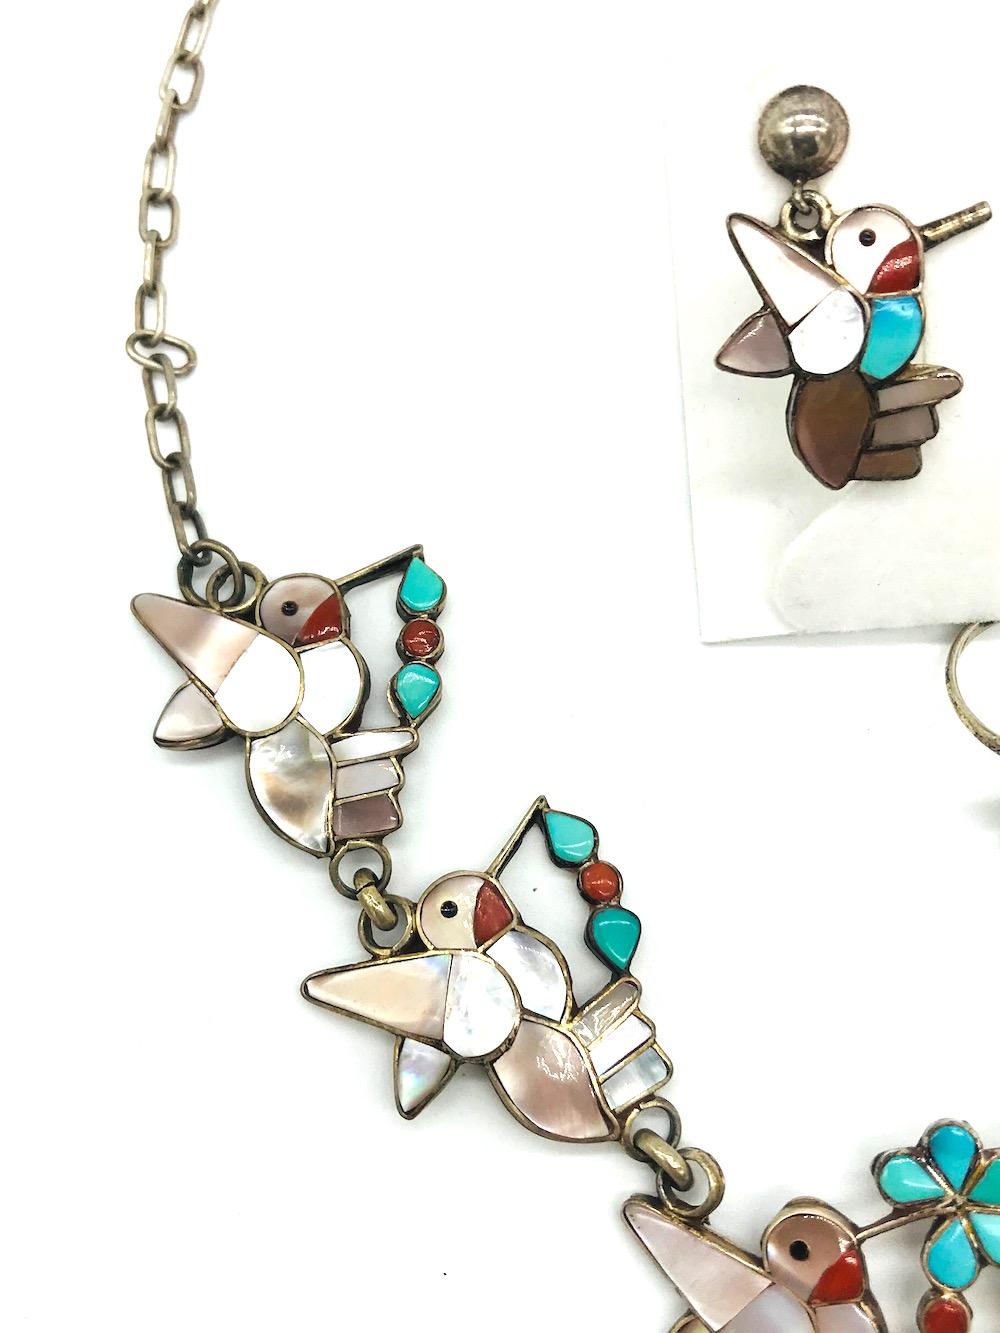 Artist Hummingbird, Earring Necklace Ring, Turquoise and Mother of Pearl Set
Intrigue detailed birds set in carved turquoise and mother of pearl. The base is sterling silver, 925. The necklace is 18 inches in length.
Earrings are 1 inch in length